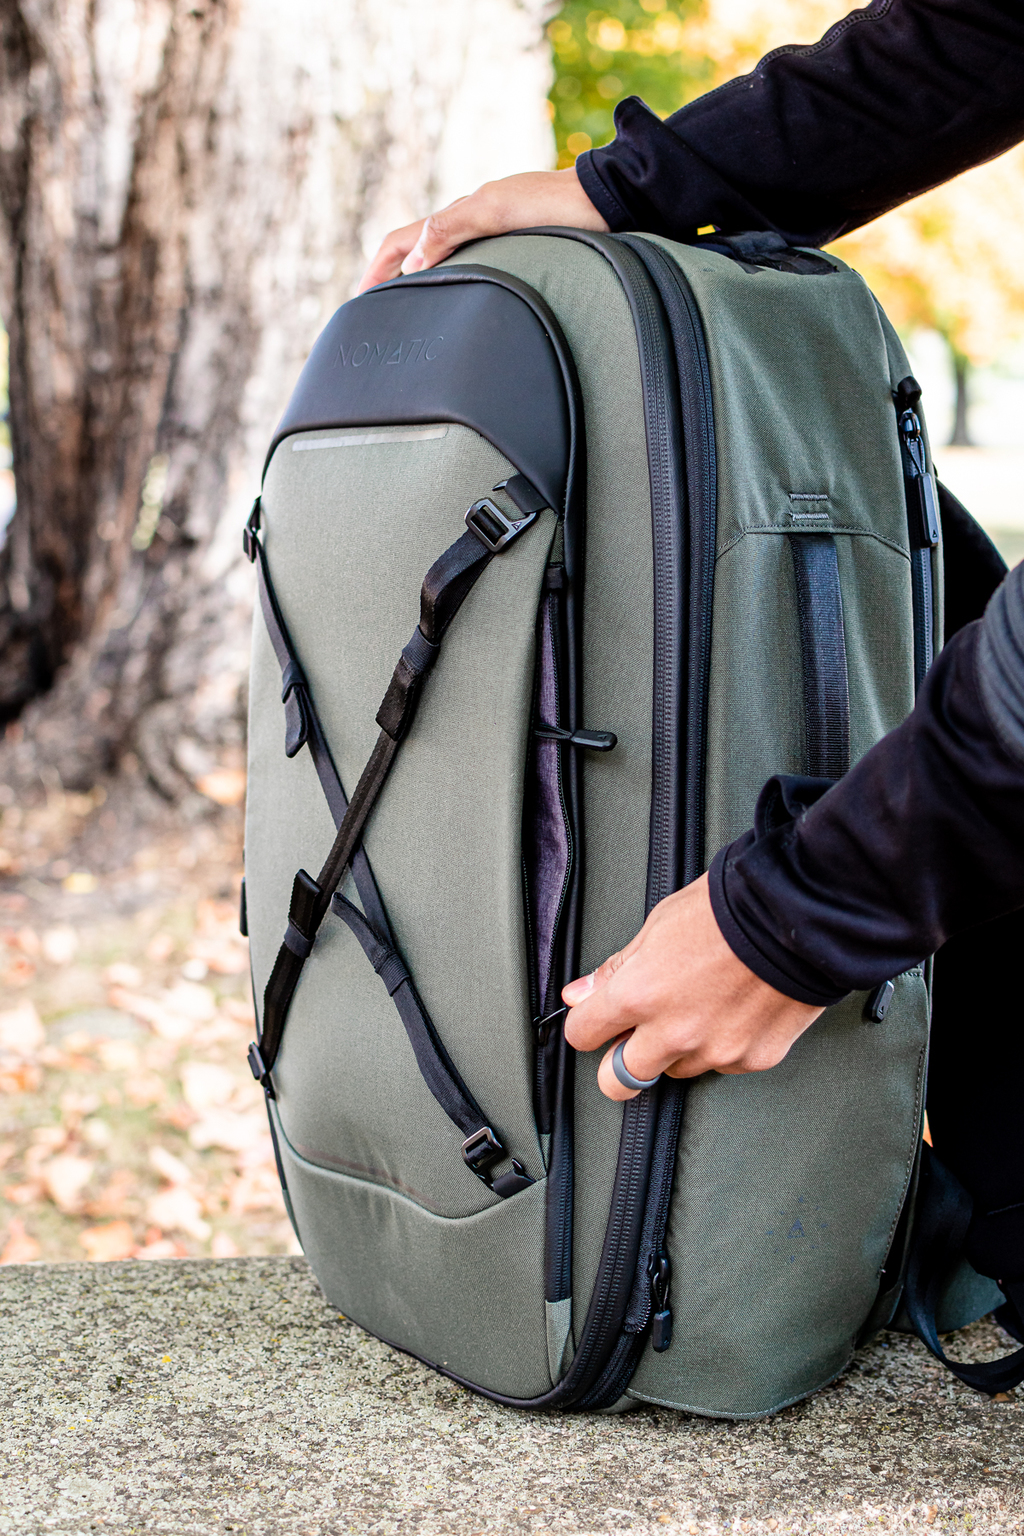 21 Amazing Year-Round Outdoor Gifts For Nature Lovers And Adventurers